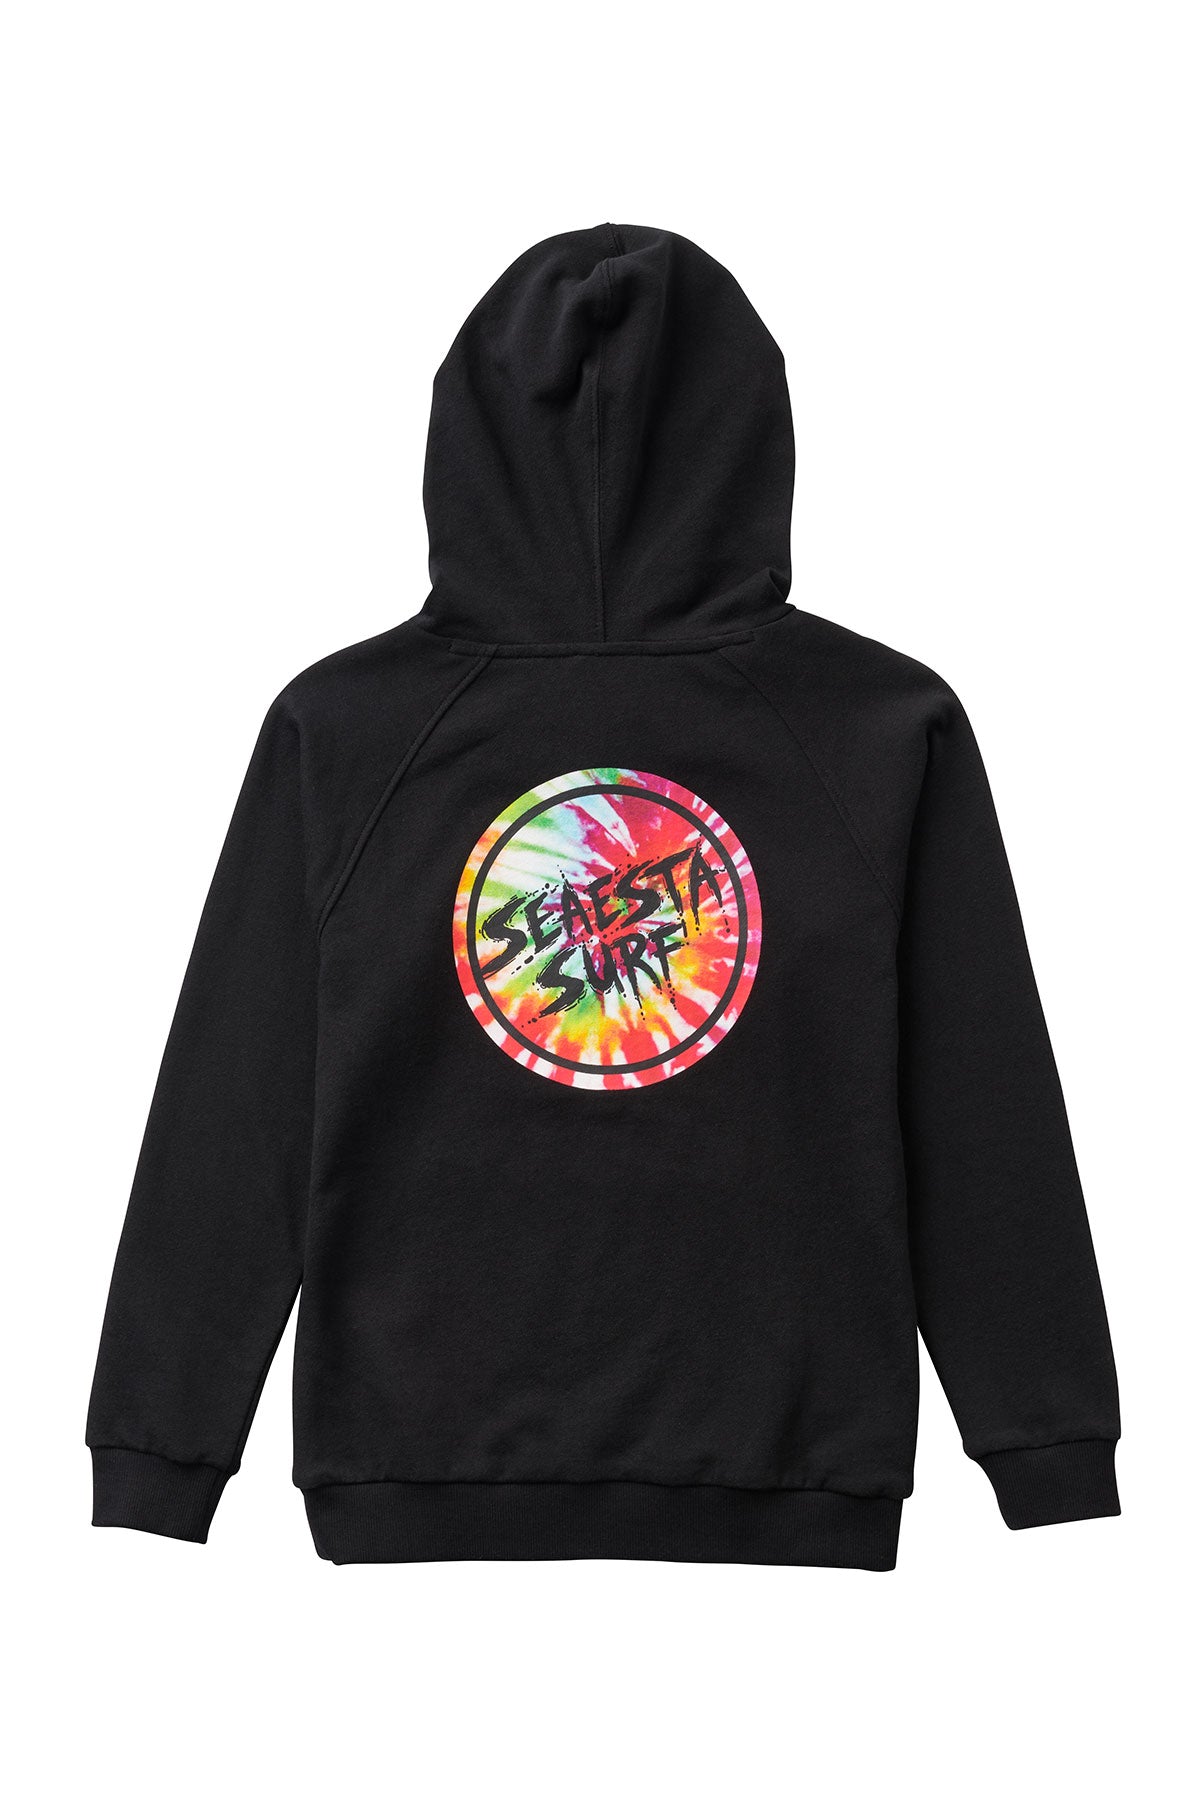 Image of Seaesta Surf Black Hoodie with Tie Dye Graphic / Youth